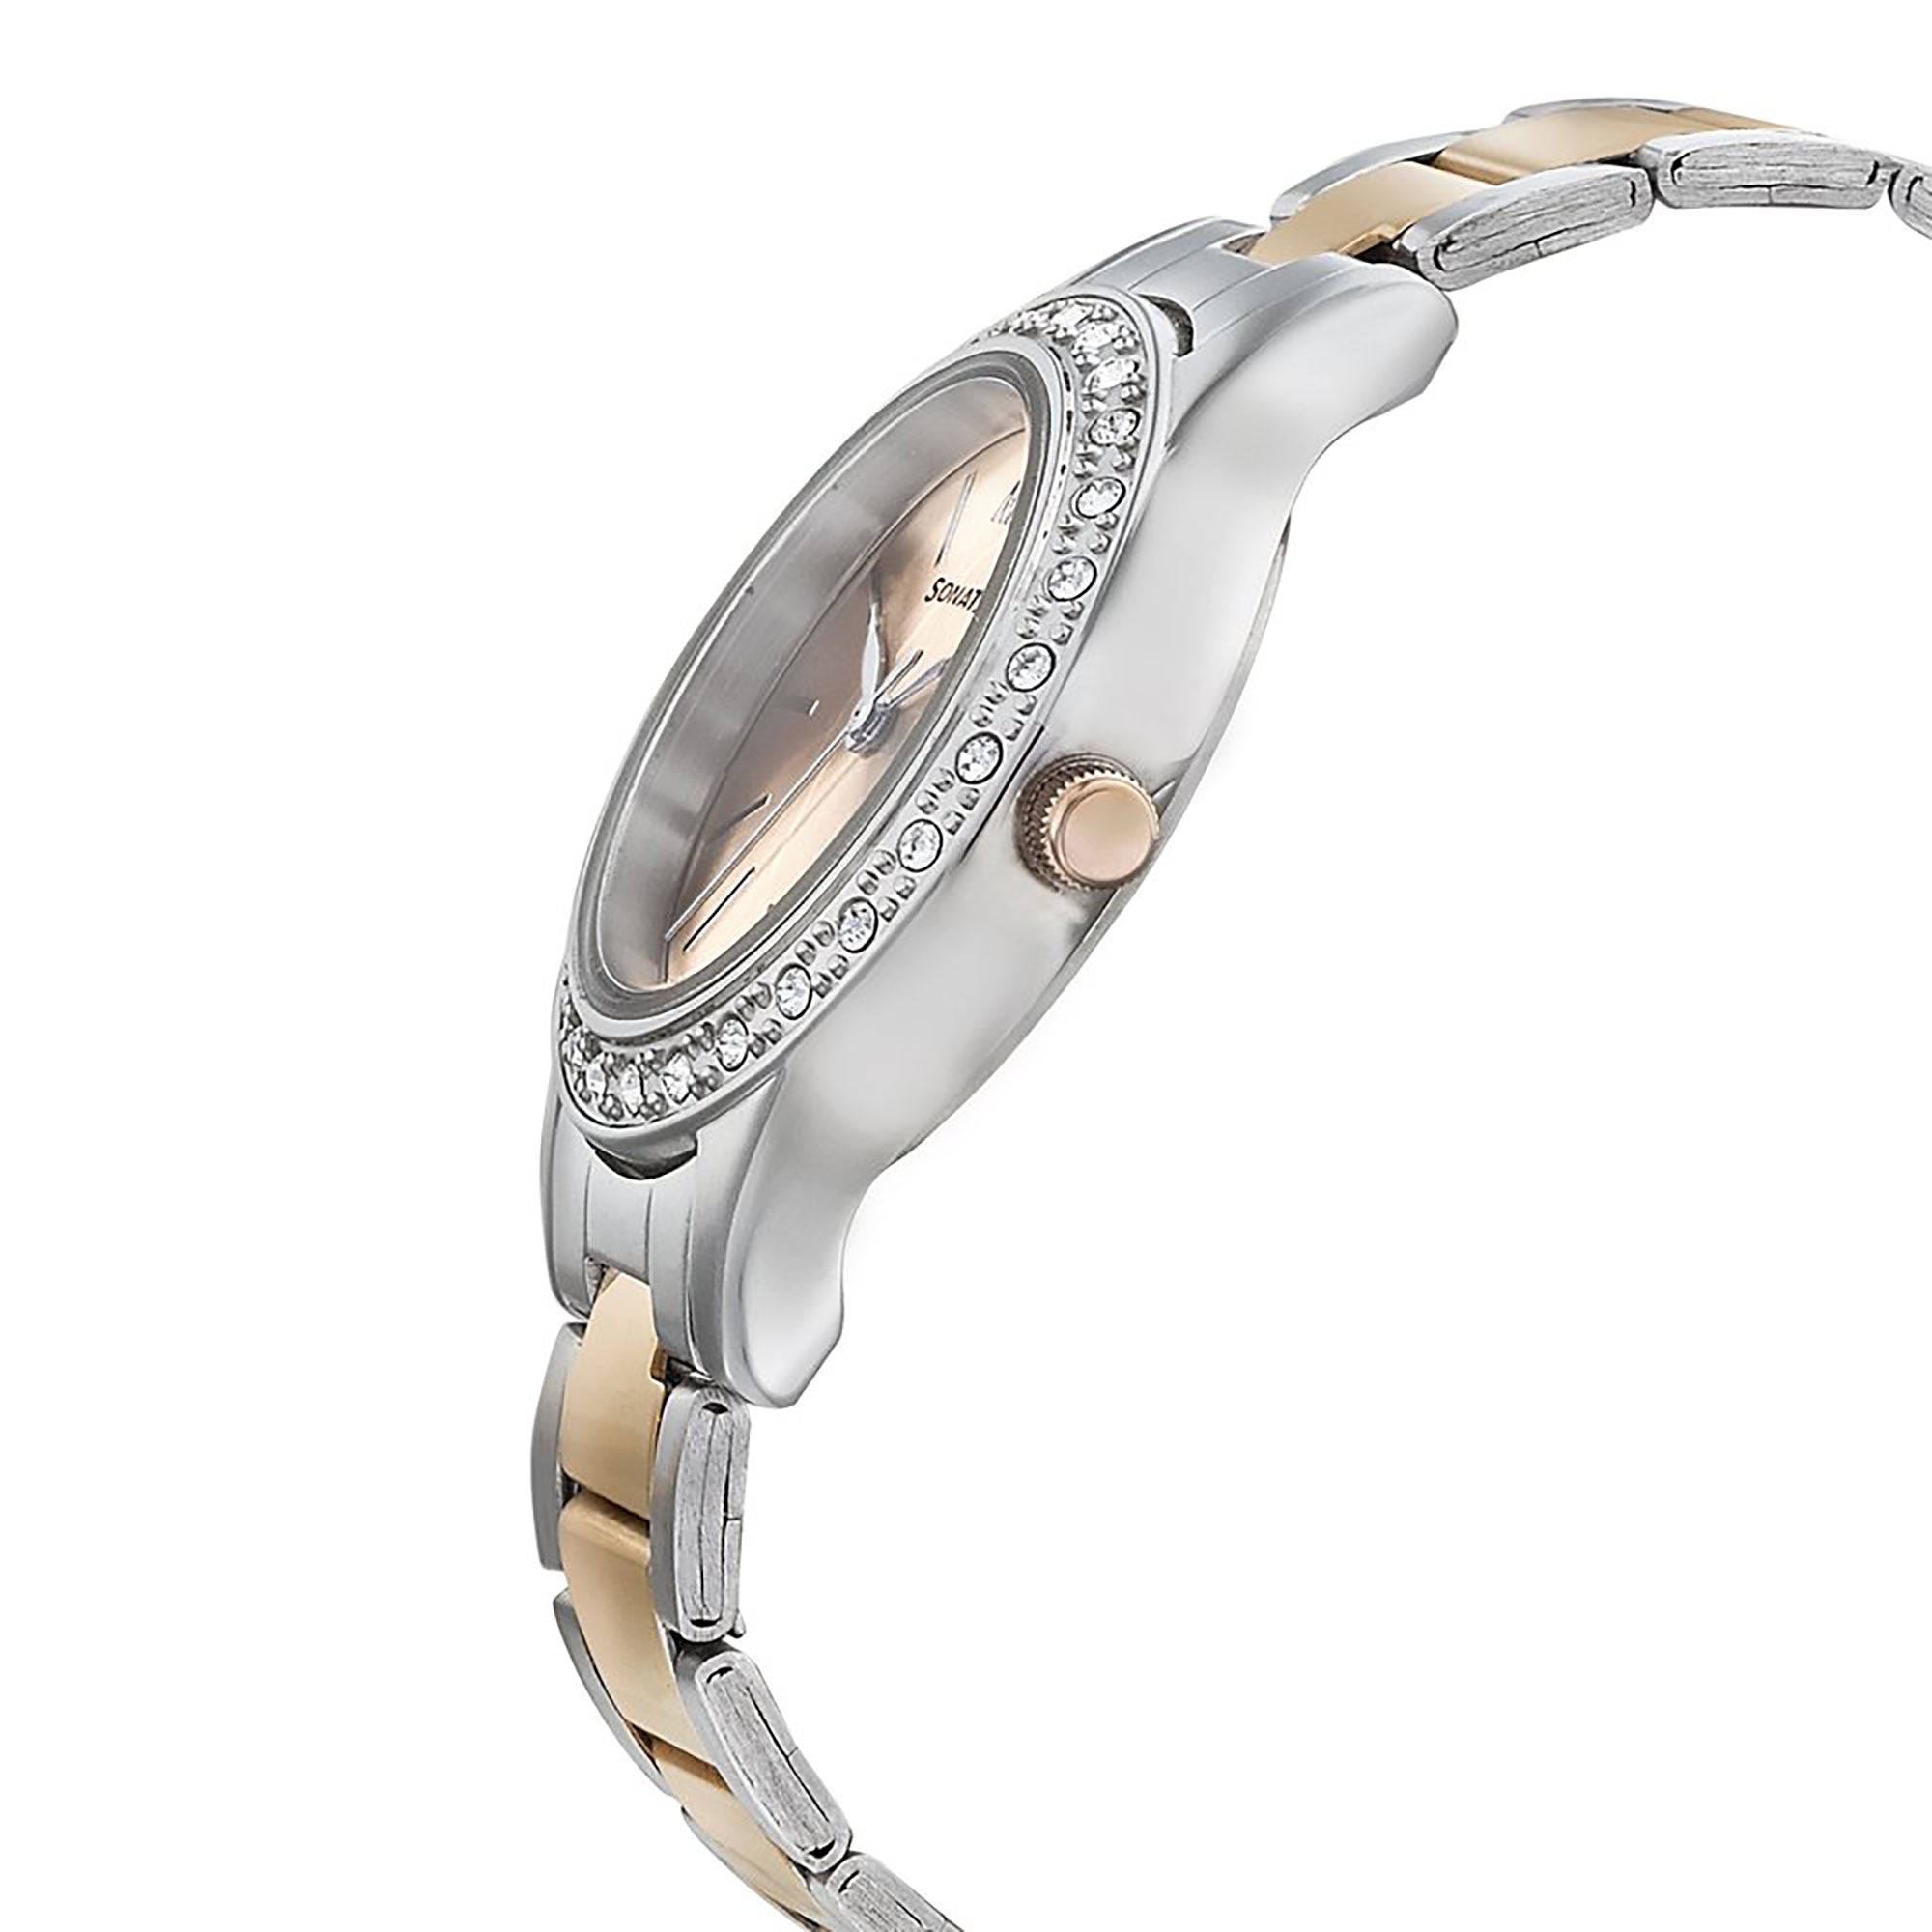 Sonata Blush Rose Gold Dial Women Watch With Stainless Steel Strap